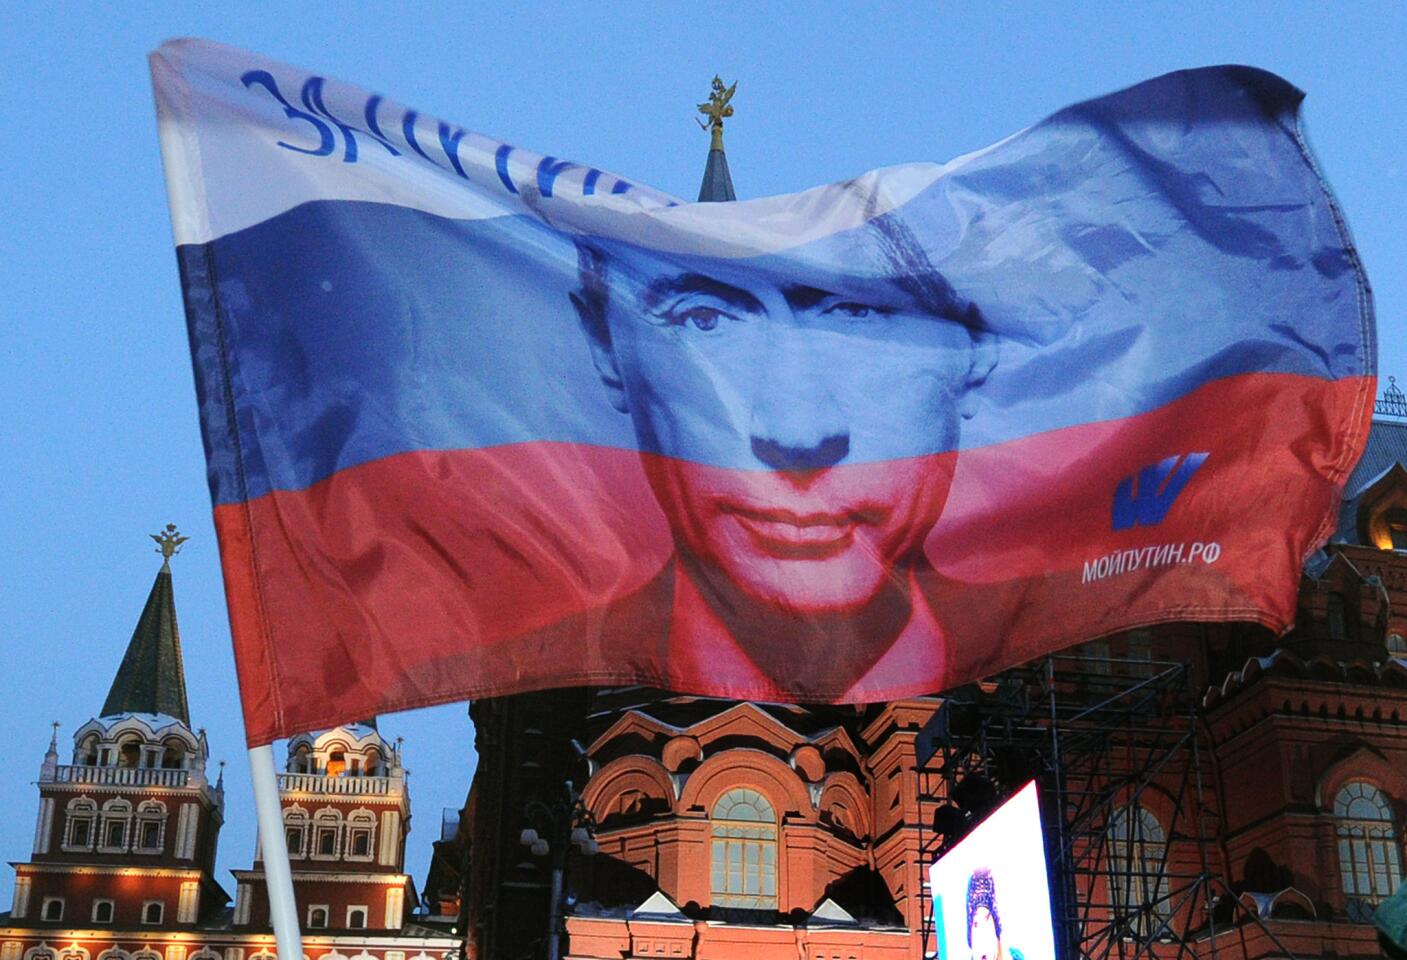 A Russian flag featuring Prime Minister Vladimir Putin flies above his supporters at a square just outside the Kremlin in Moscow as they celebrate Putin's election on March 5, 2012. Putin regained the presidency after four years as prime minister.